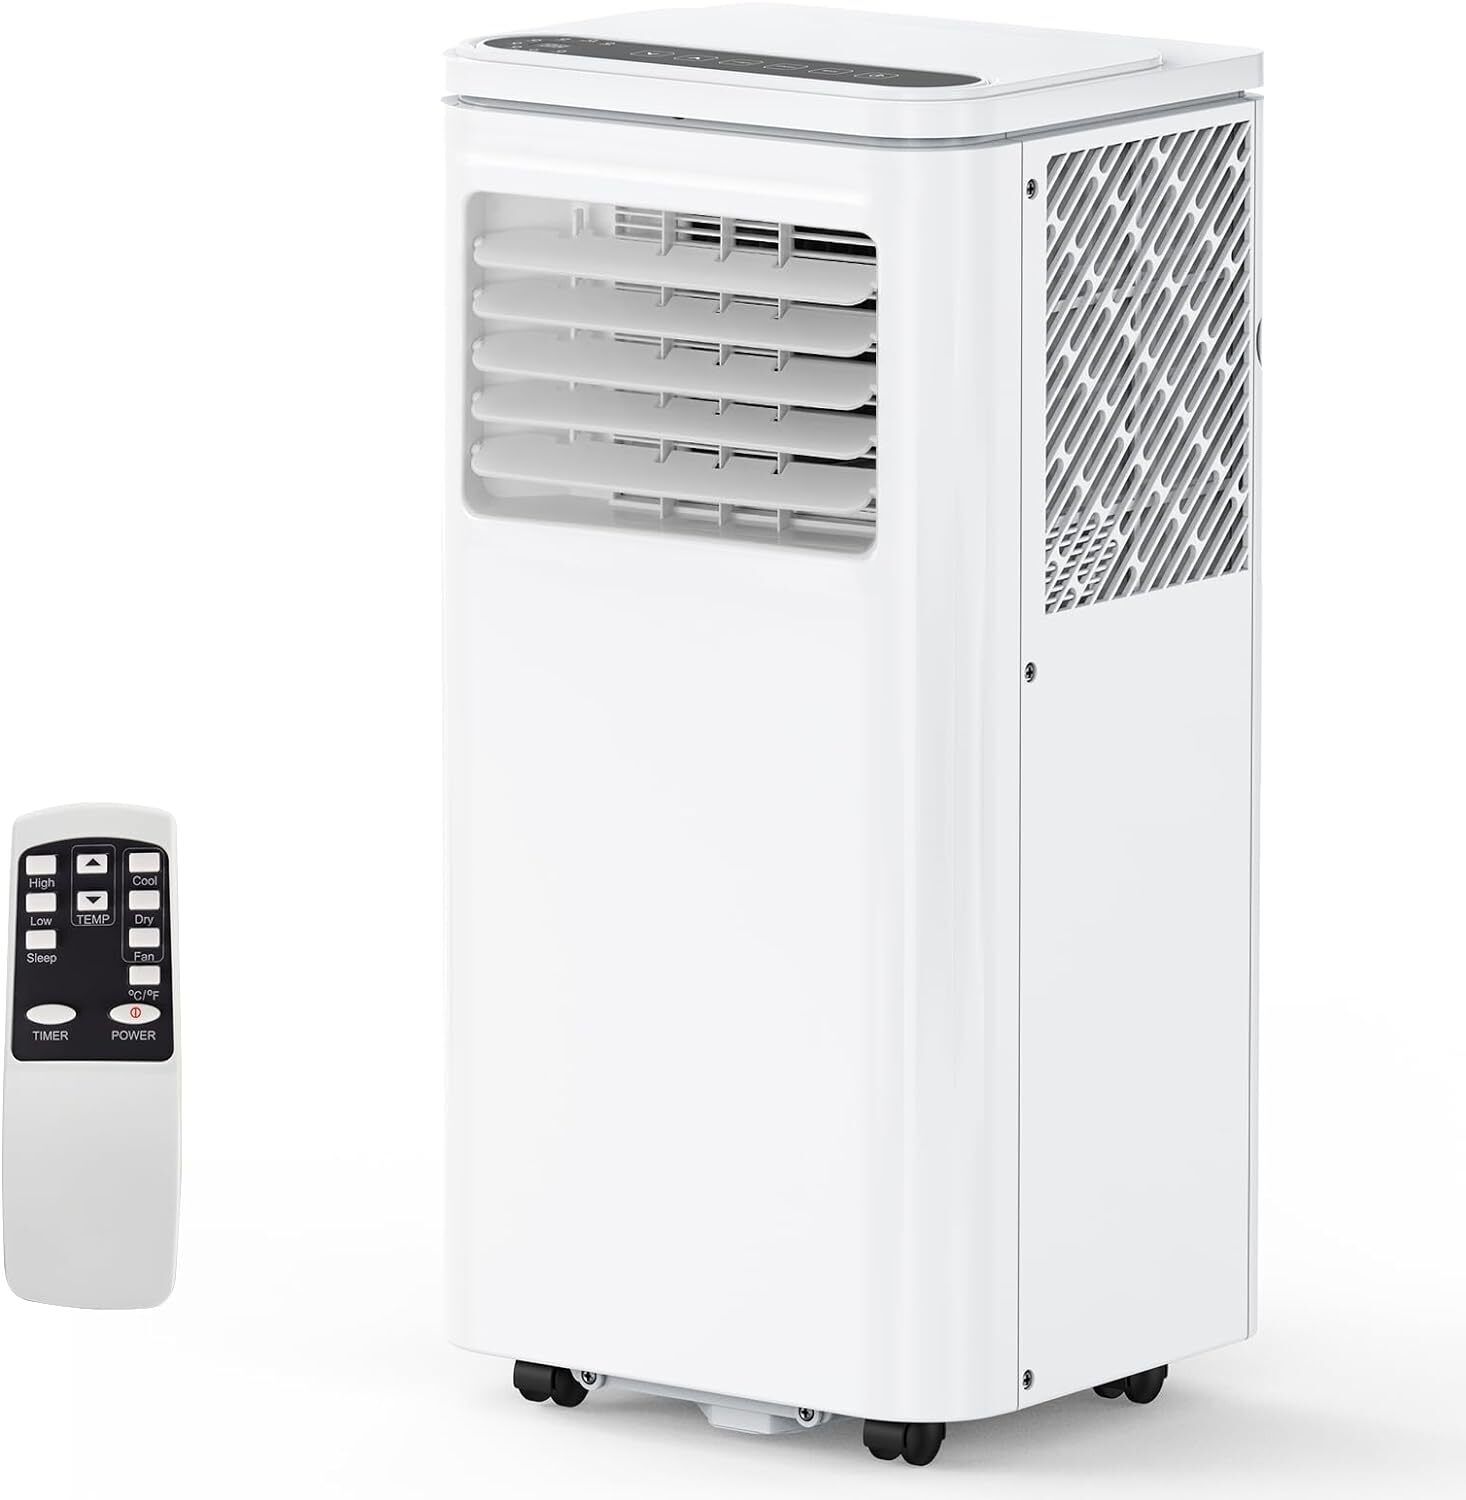 8000 BTU Portable Air Conditioners 4-IN-1 AC Unit With Cooling/Dehumidifier/Fan